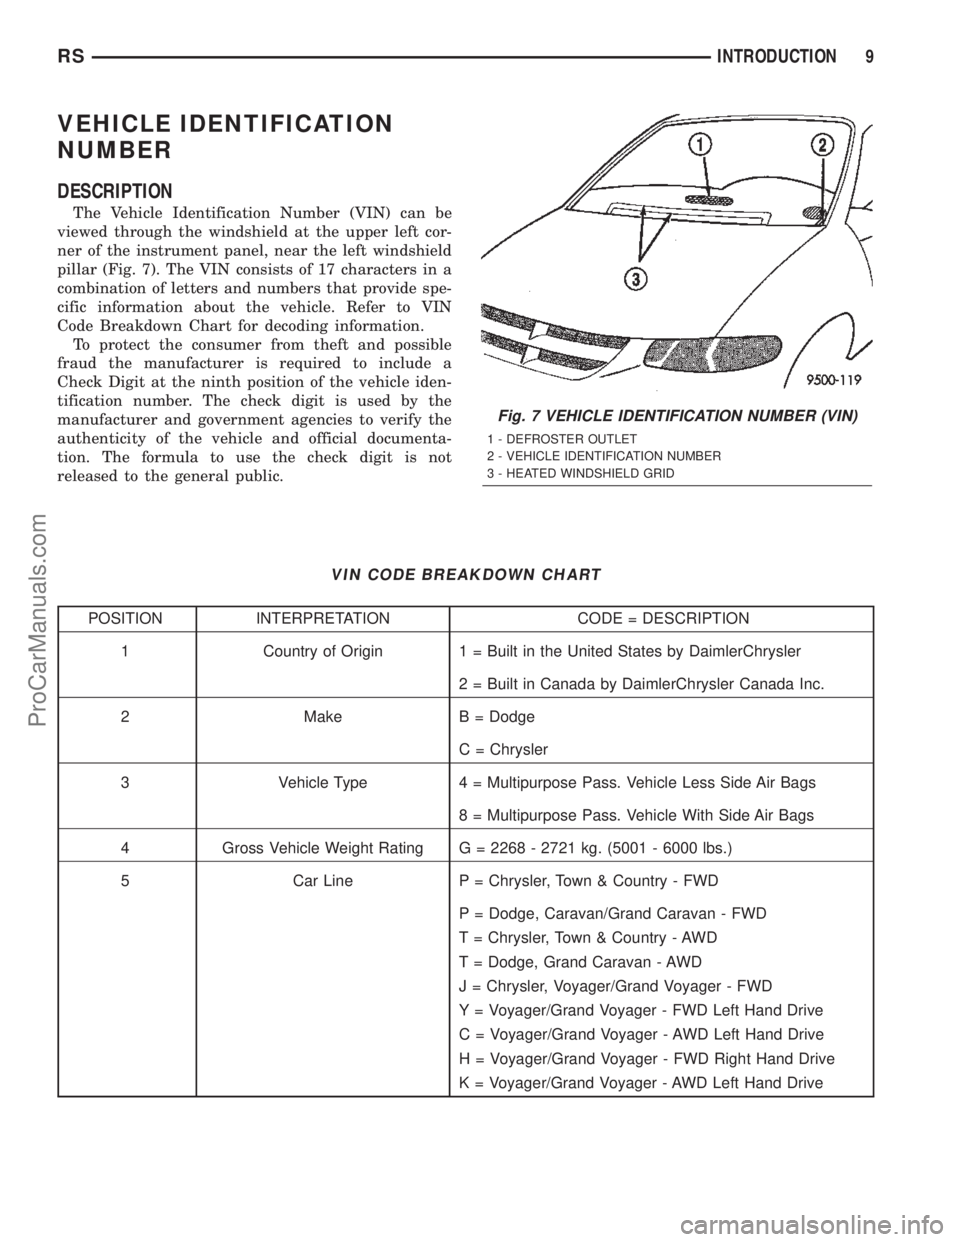 CHRYSLER CARAVAN 2002  Service Manual VEHICLE IDENTIFICATION
NUMBER
DESCRIPTION
The Vehicle Identification Number (VIN) can be
viewed through the windshield at the upper left cor-
ner of the instrument panel, near the left windshield
pill